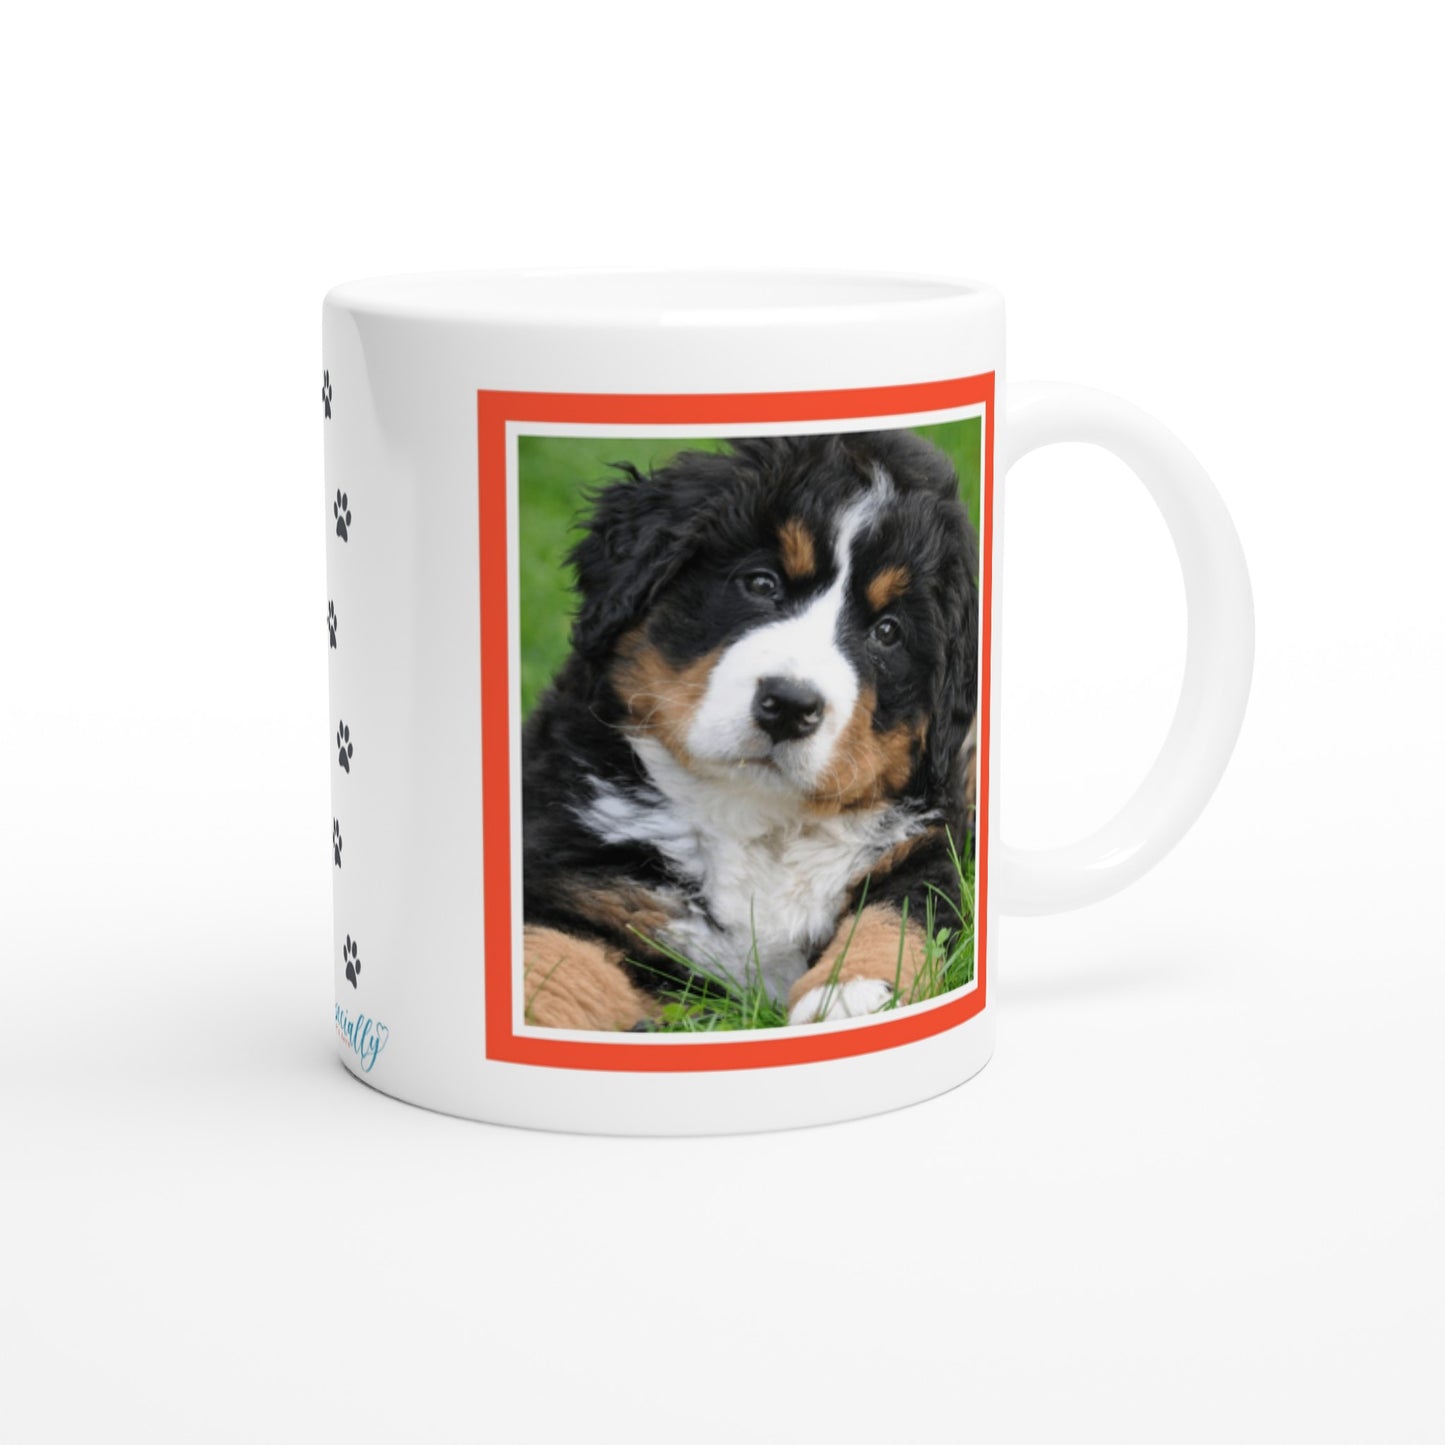 "I'd rather be home with my dog" Customizable Photo 11 oz. Mug back view